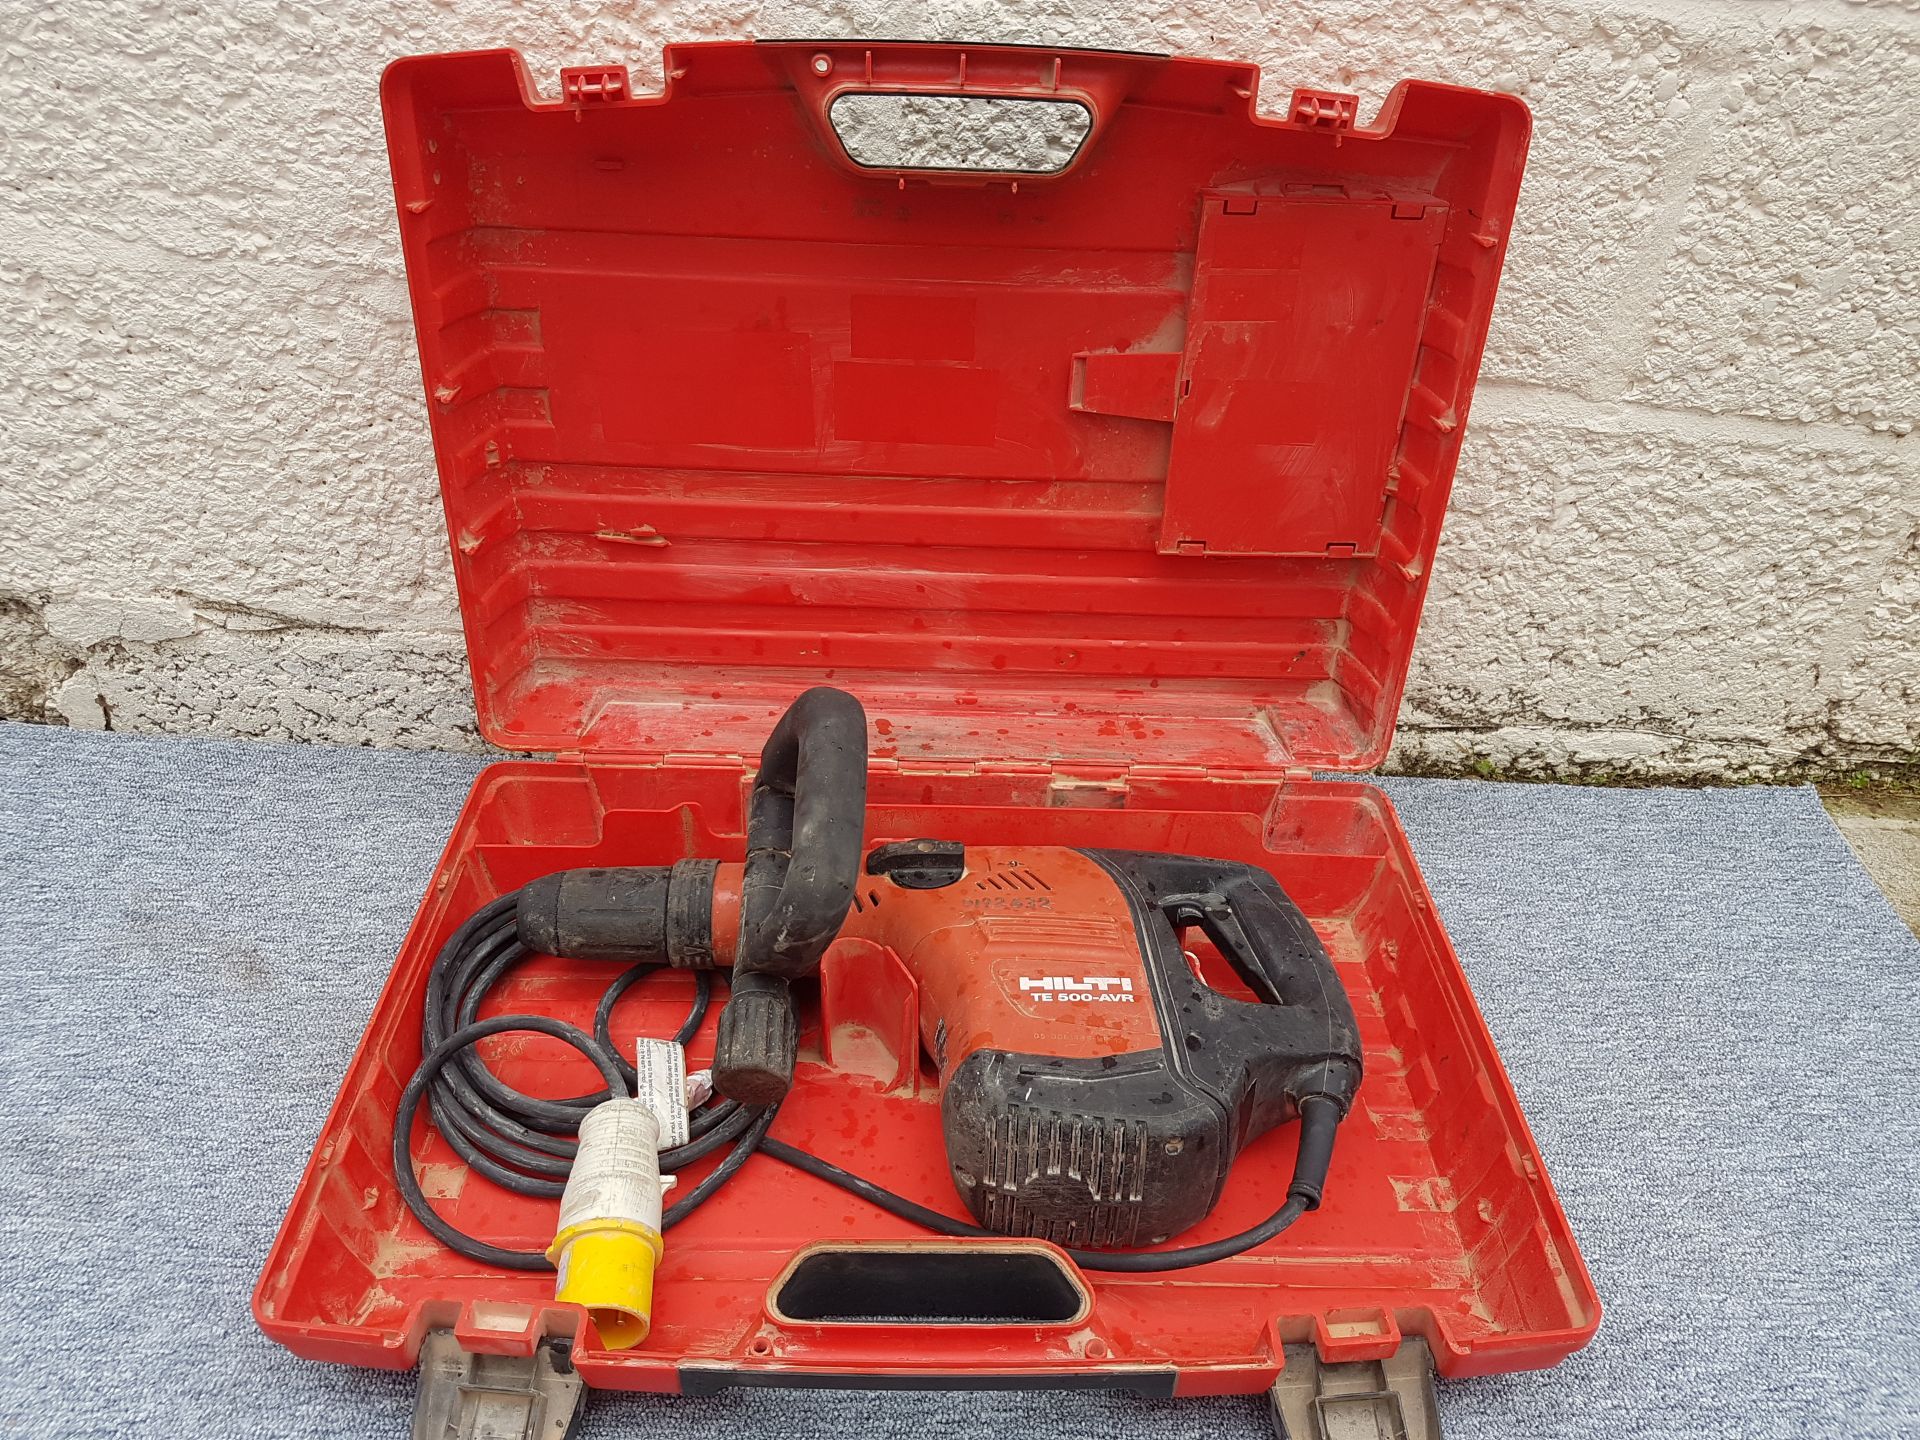 Hilti TE 500 AVR SDS Lightweight Breaker with Chisel 110v in Box - Tested / In Working Order